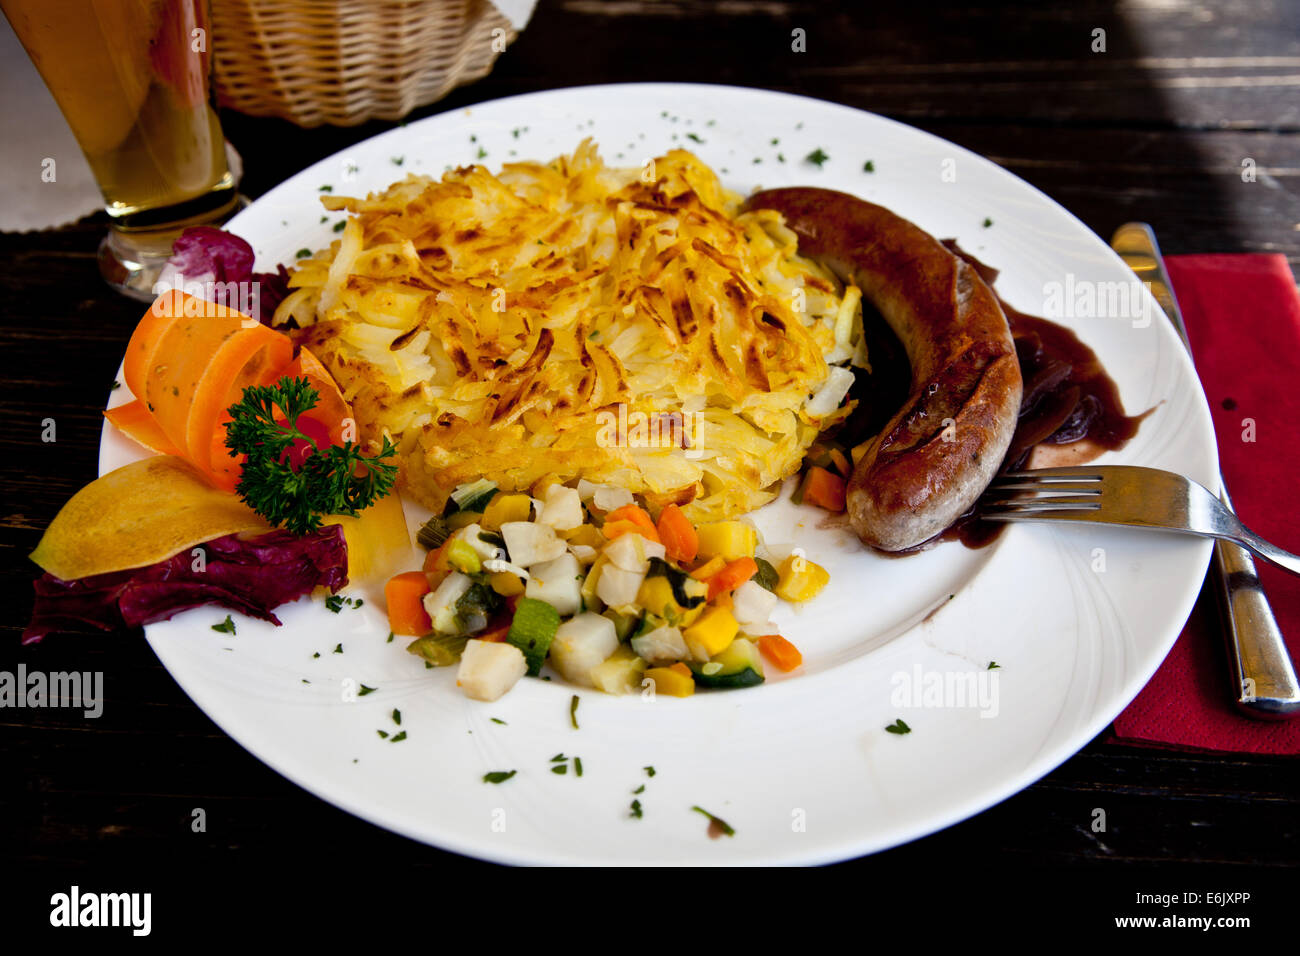 Hearty Swiss Alpen fare incuding pork Schnitzel with roasted potatos and vegetables garnished with cabbage, carrots, parsely. Stock Photo